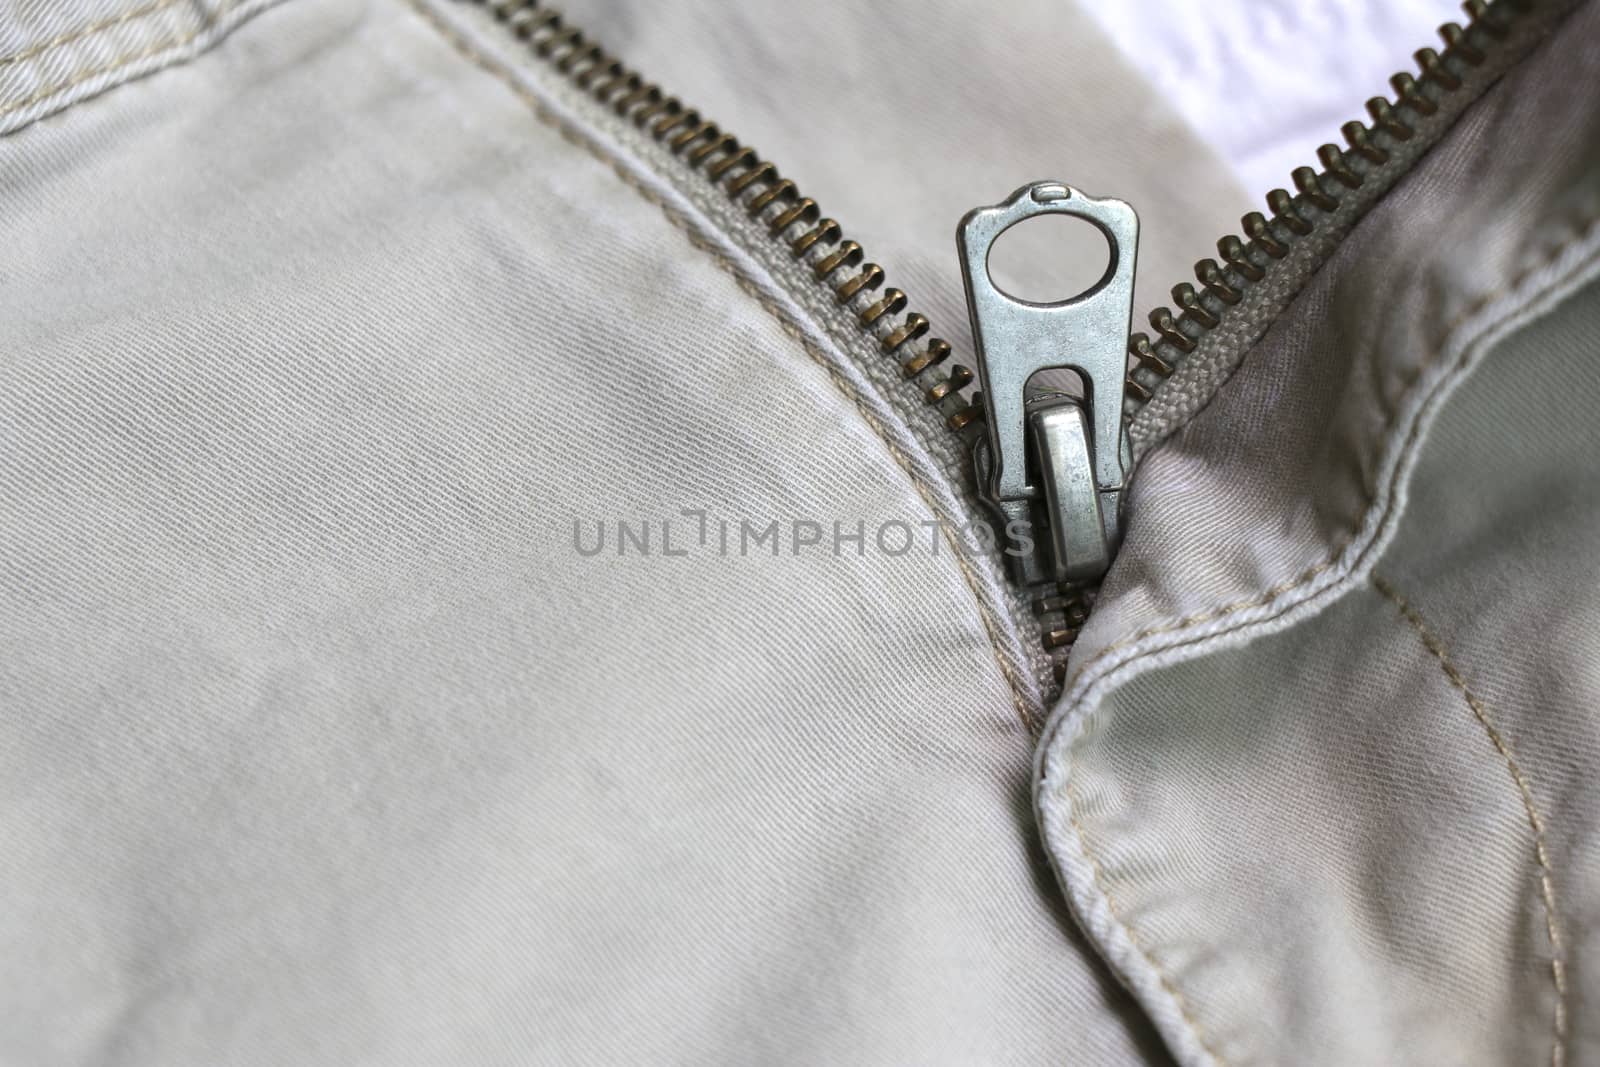 The zipper of the pants that opened. Metal zipper of cream pants. by Eungsuwat